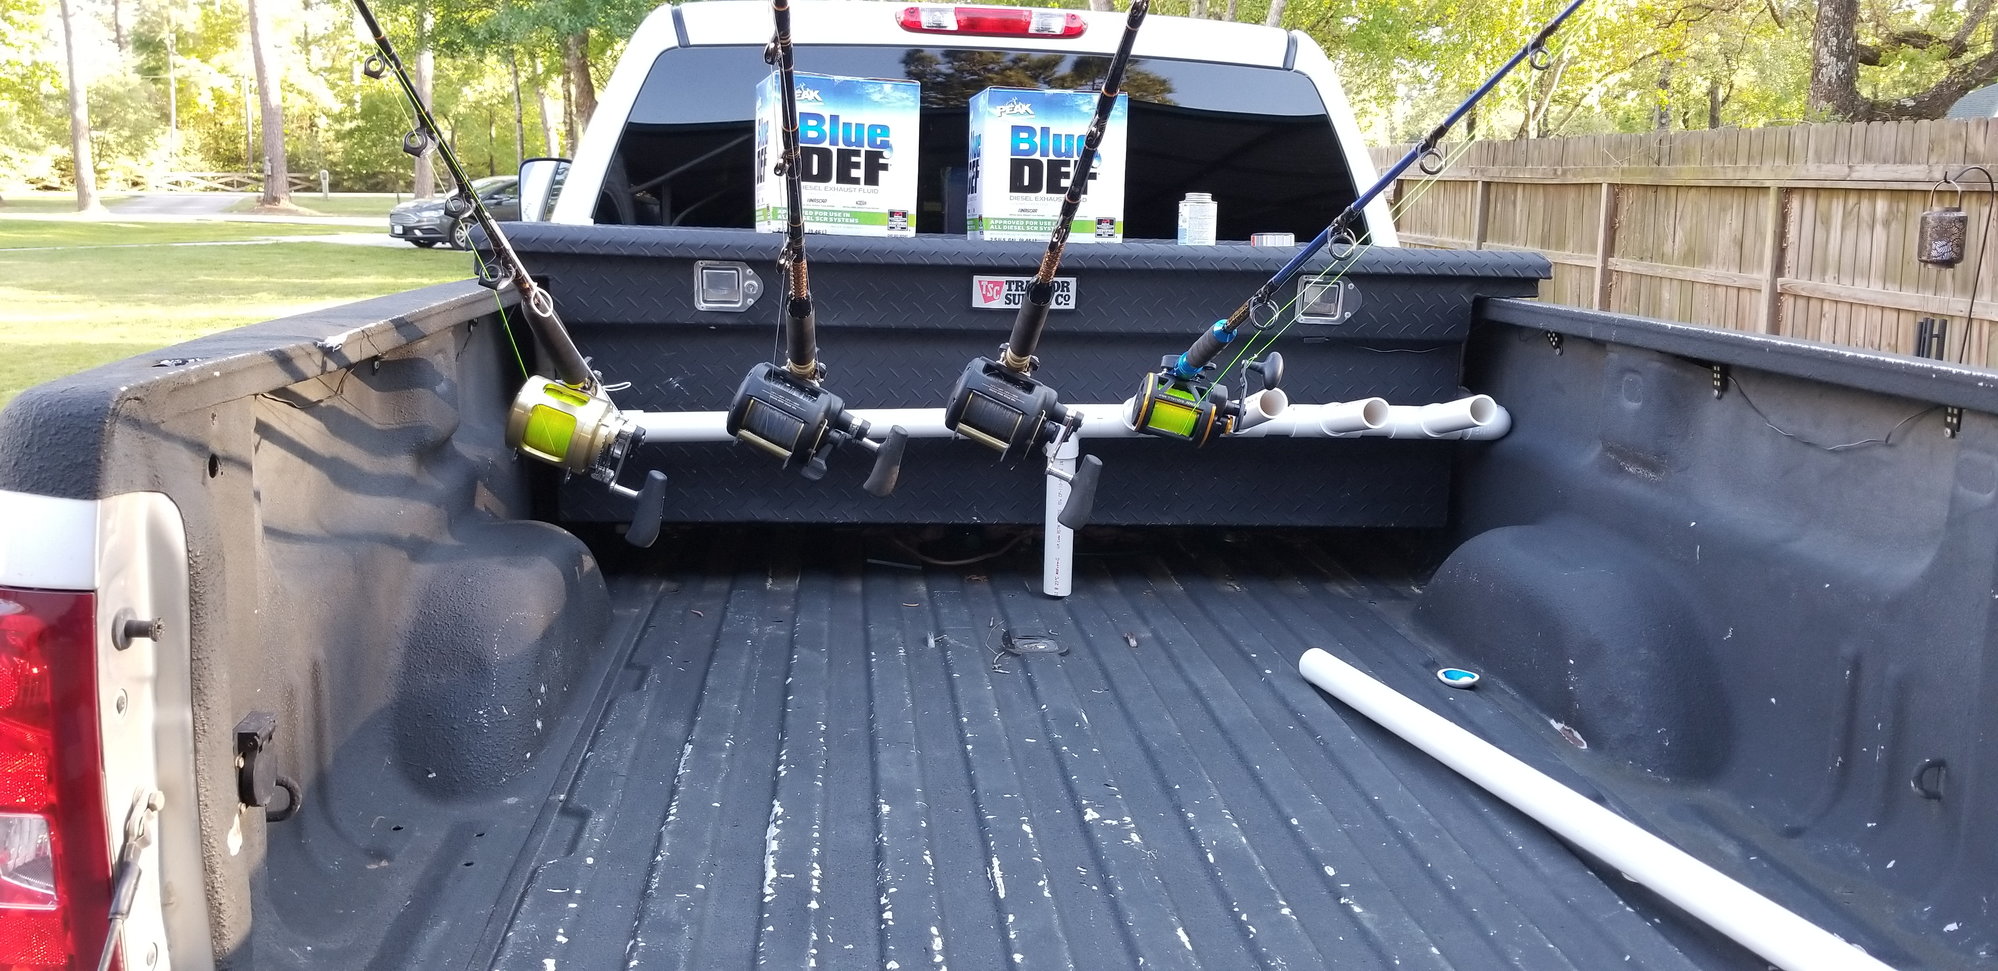 Truck bed rod holder setups - The Hull Truth - Boating and Fishing